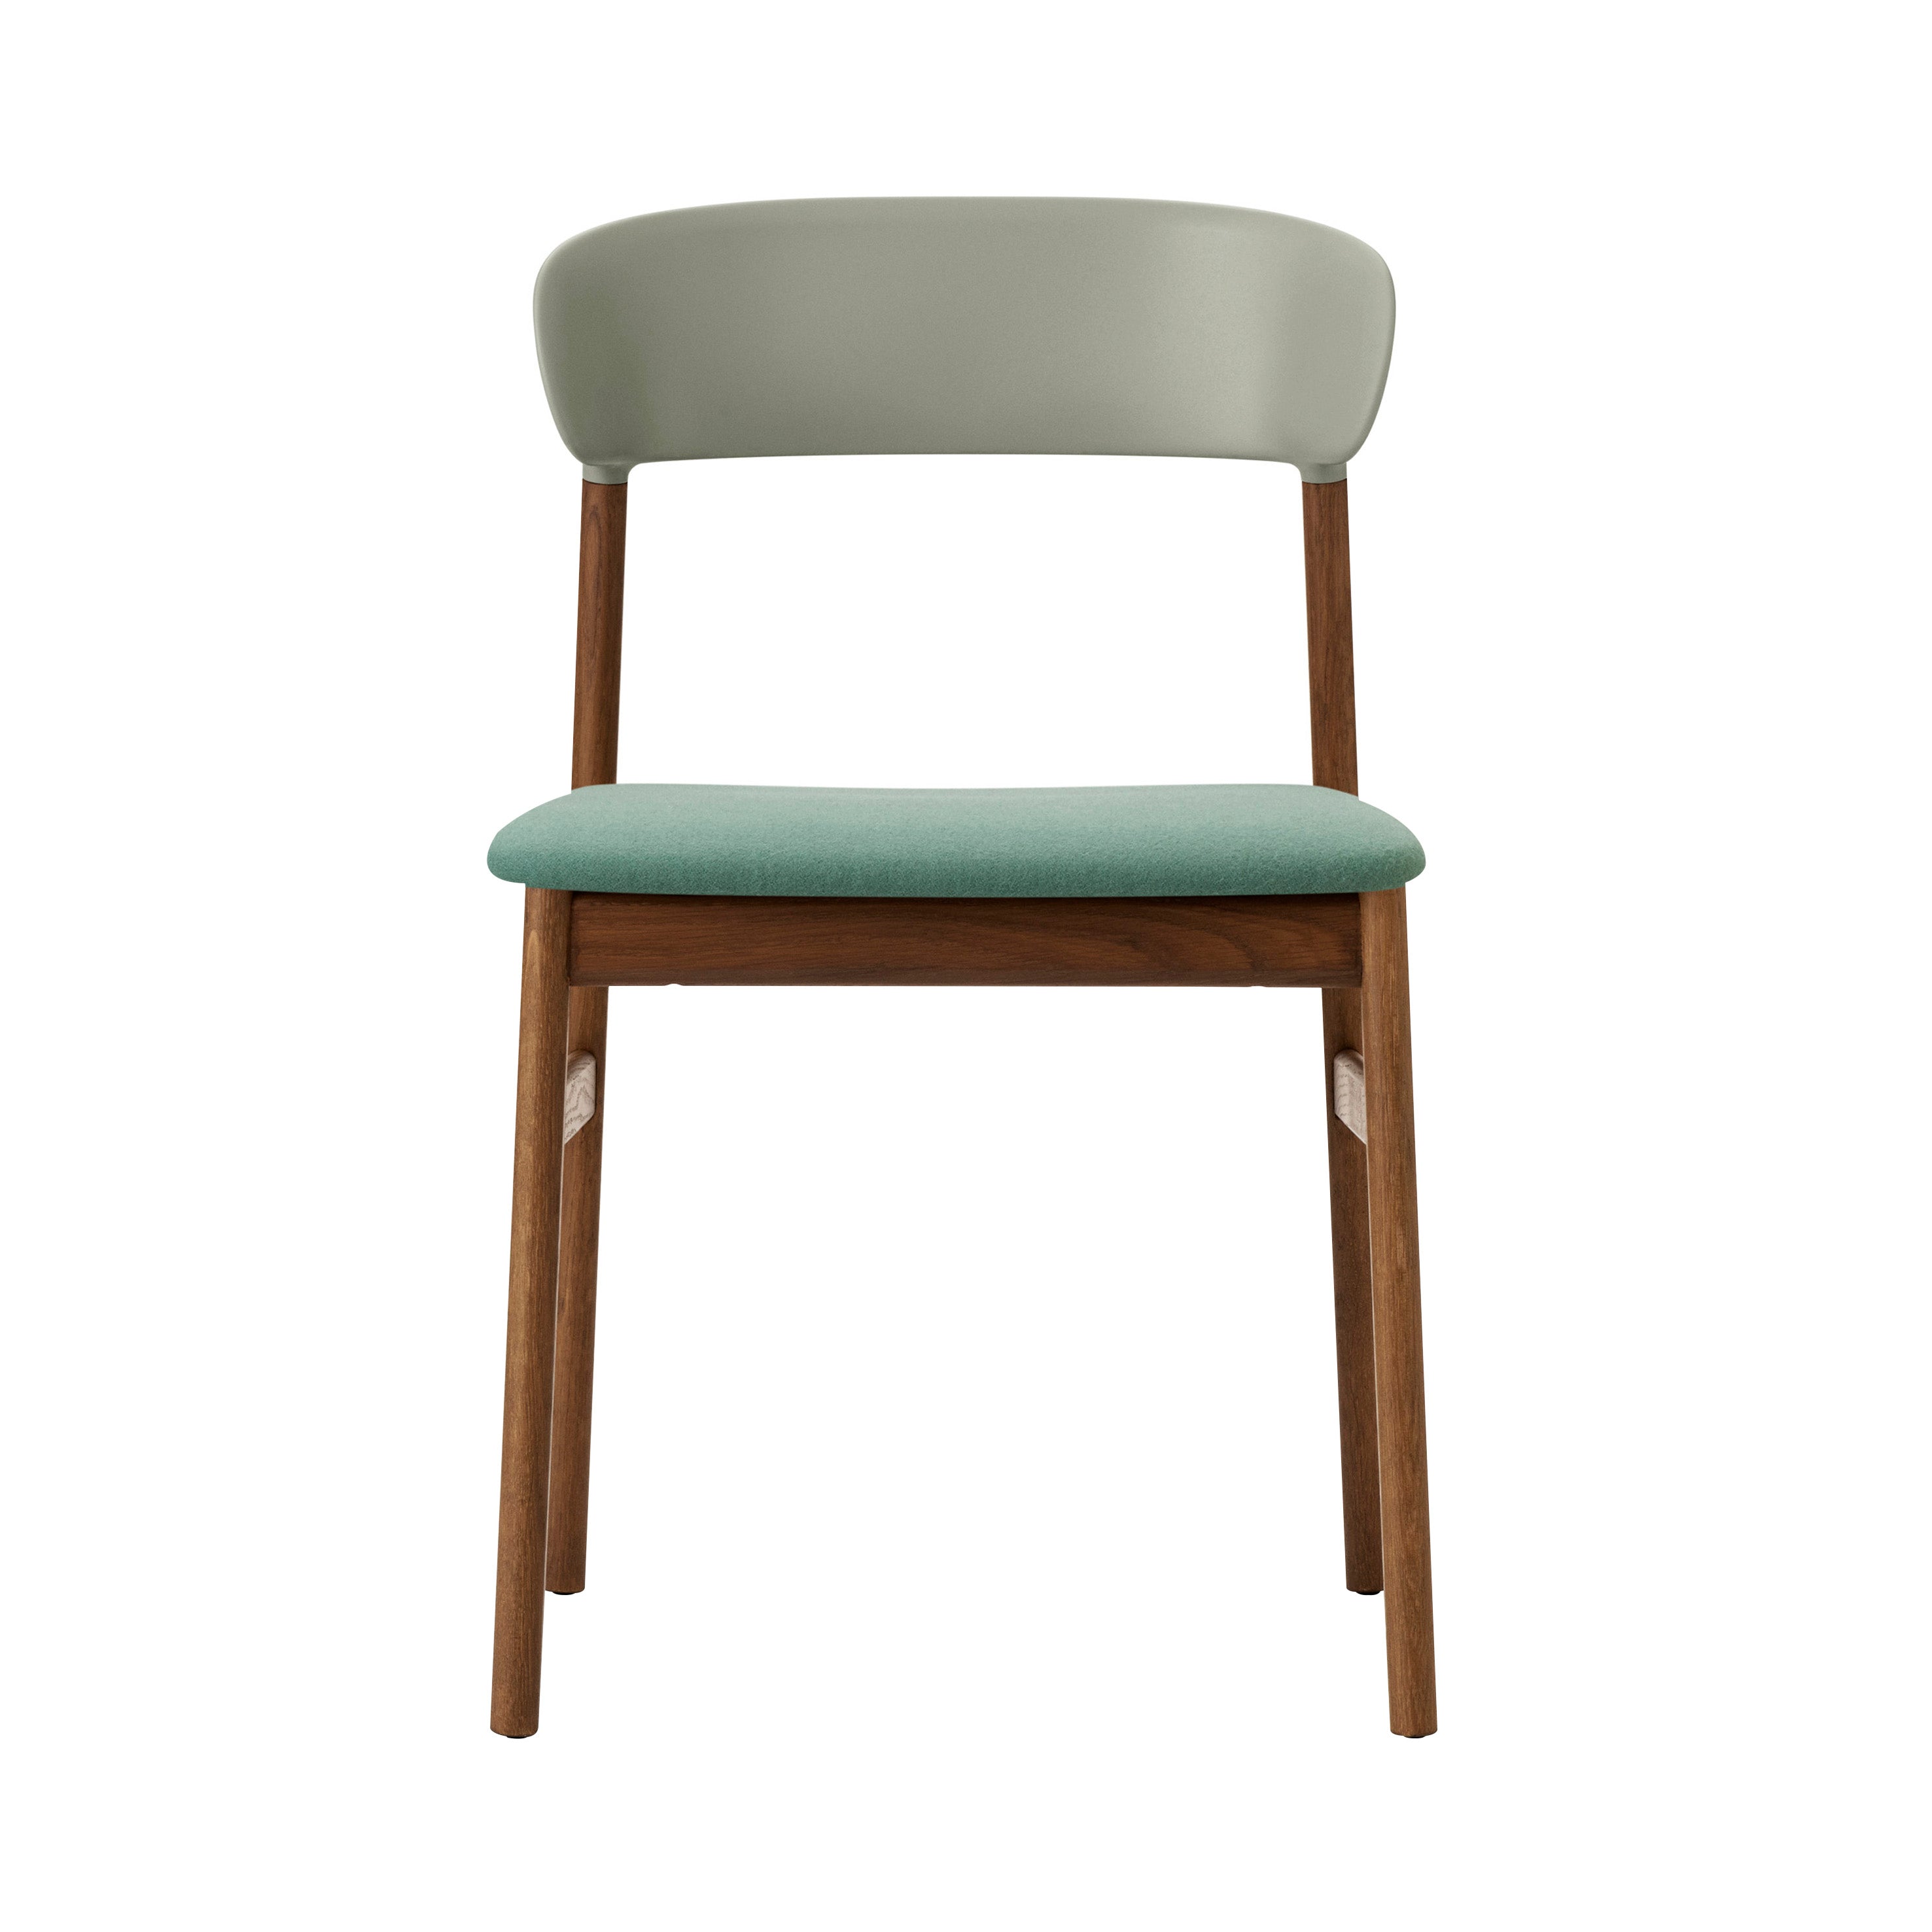 Herit Chair: Upholstered + Smoked Oak + Dusty Green + Synergy Dusty Green